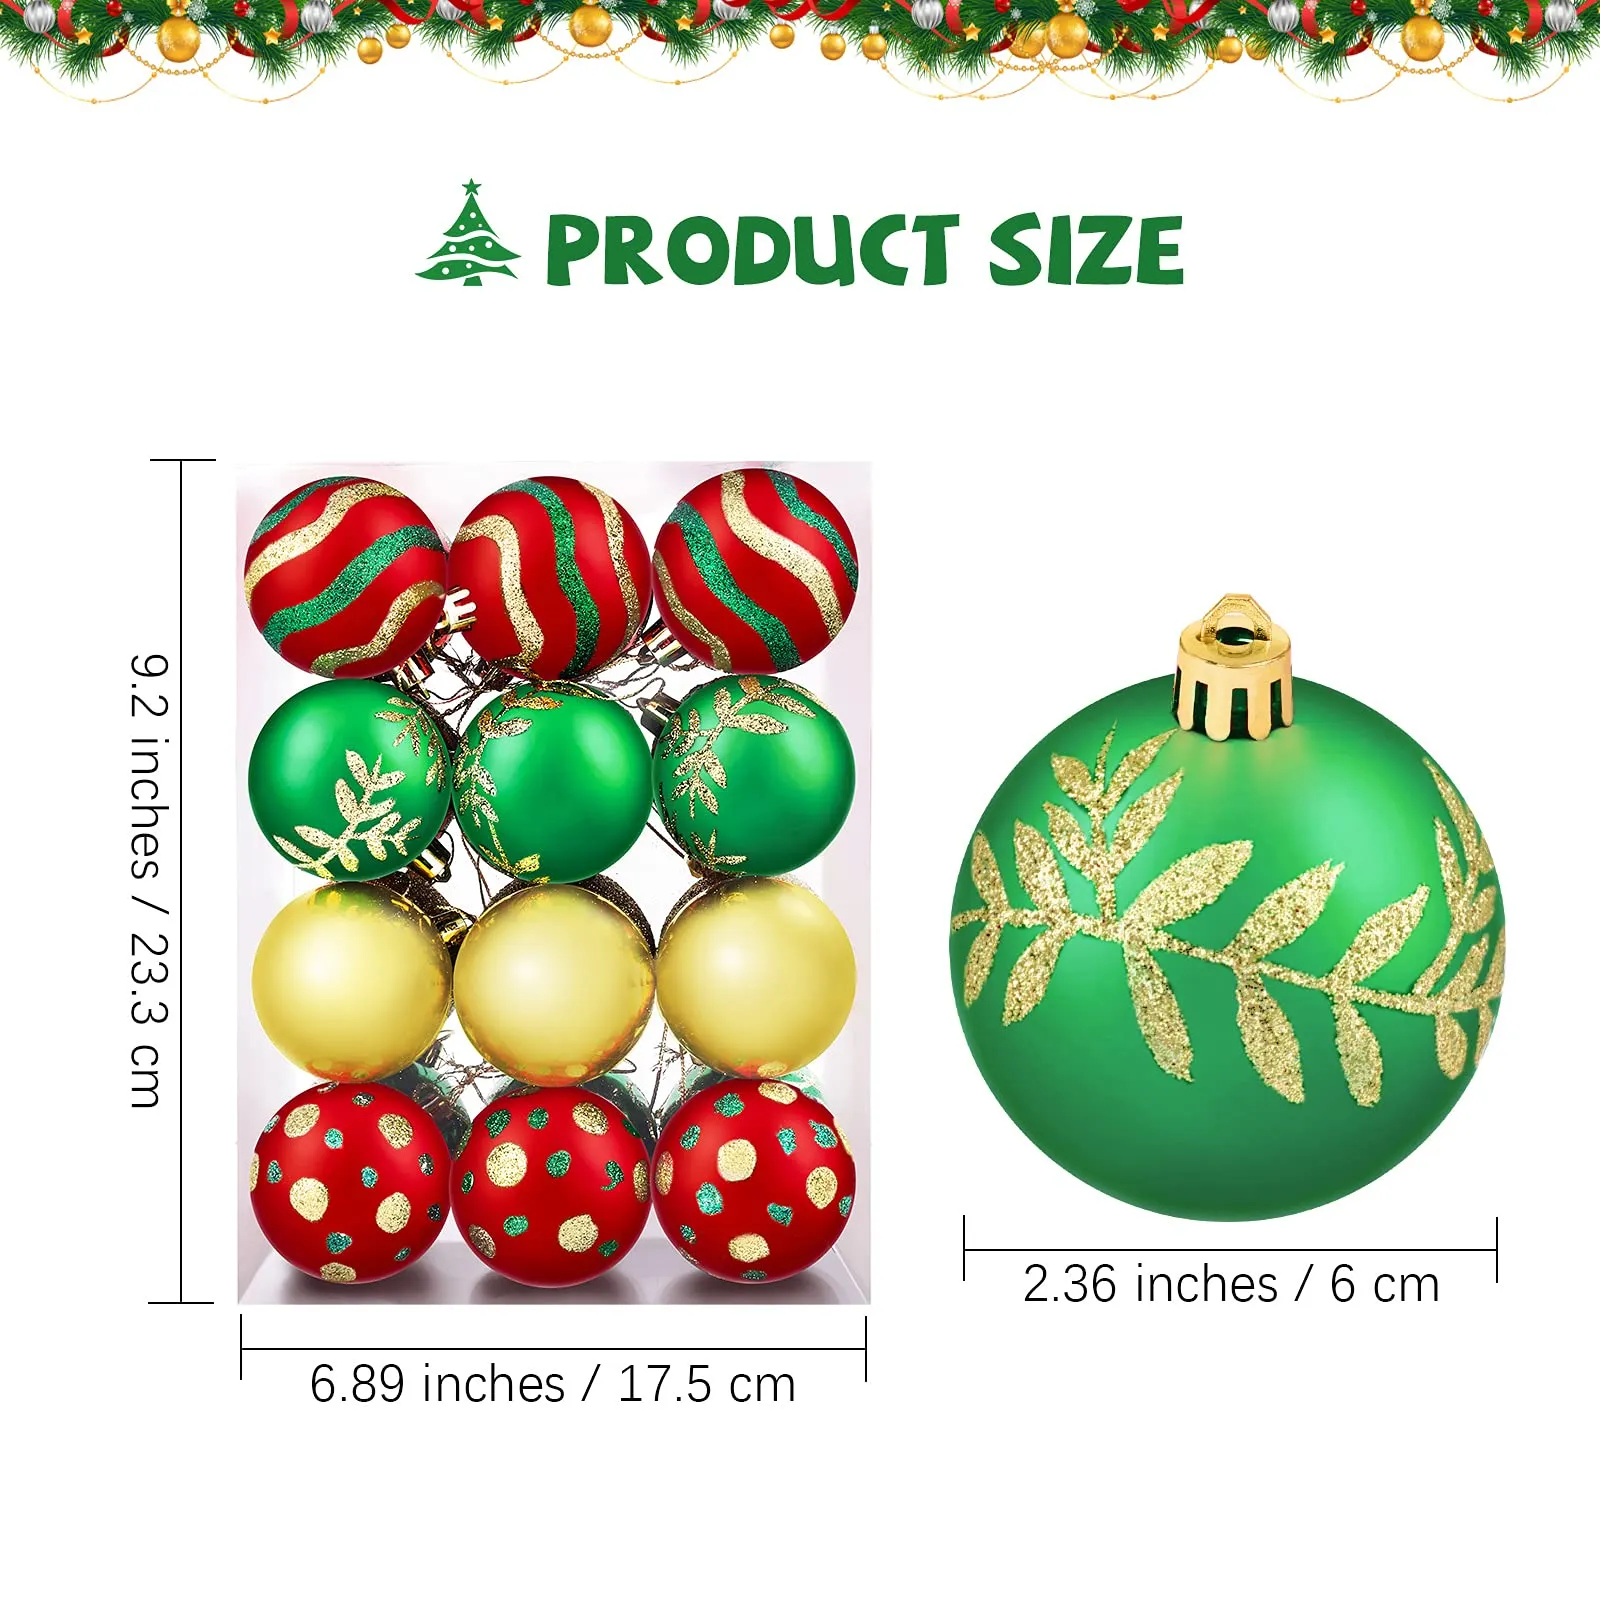 christmas ball ornaments painting glittering christmas tree pendants shatterproof decorative baubles in 8 patterns for christmas tree decorations red green gold